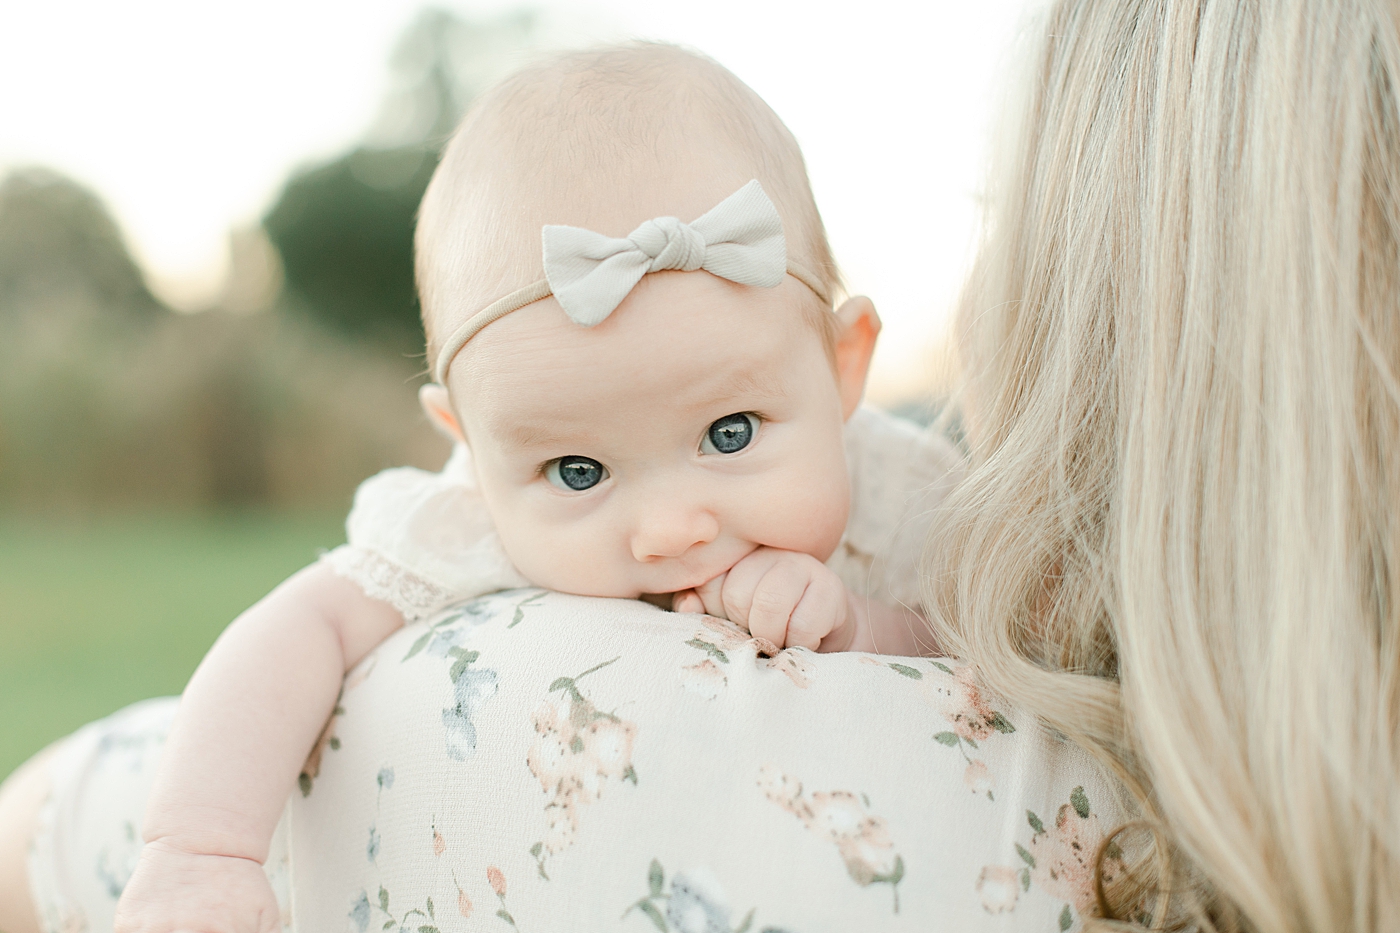 Baby girl with cream colored bow | Photo by Little Sunshine Photography